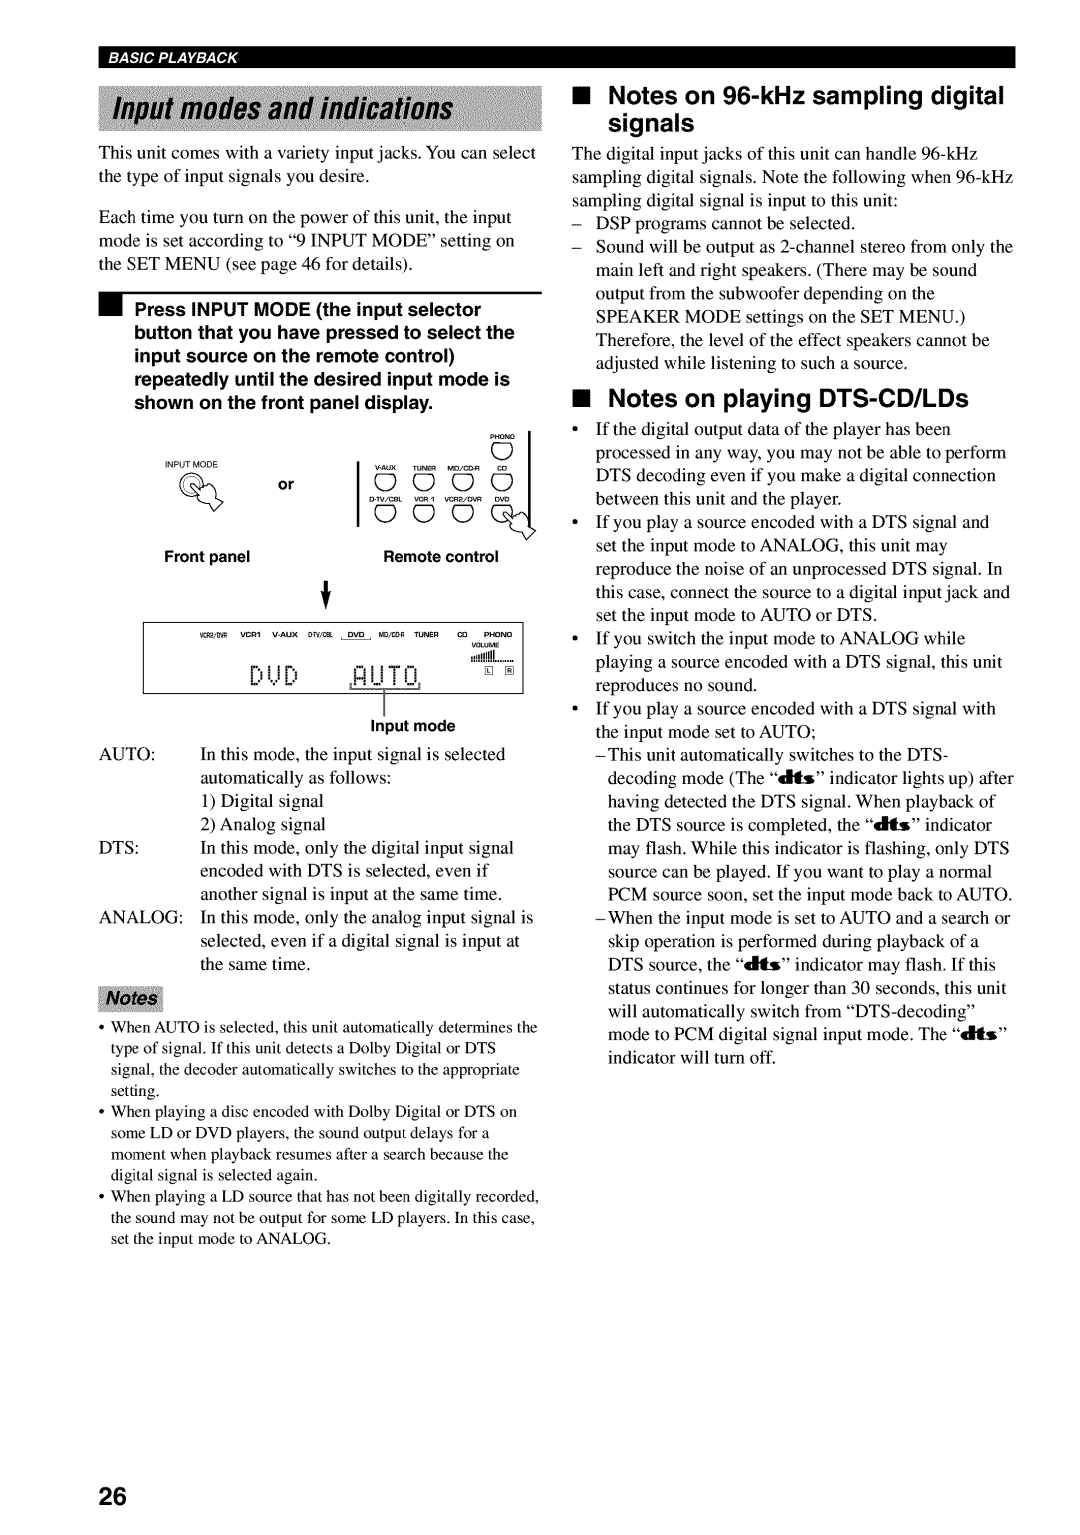 Yamaha RX-V730 owner manual •Notes on 96-kHzsampling digital signals, •Notes on playing DTS-CD/LDs, L....L, P_.iI E 